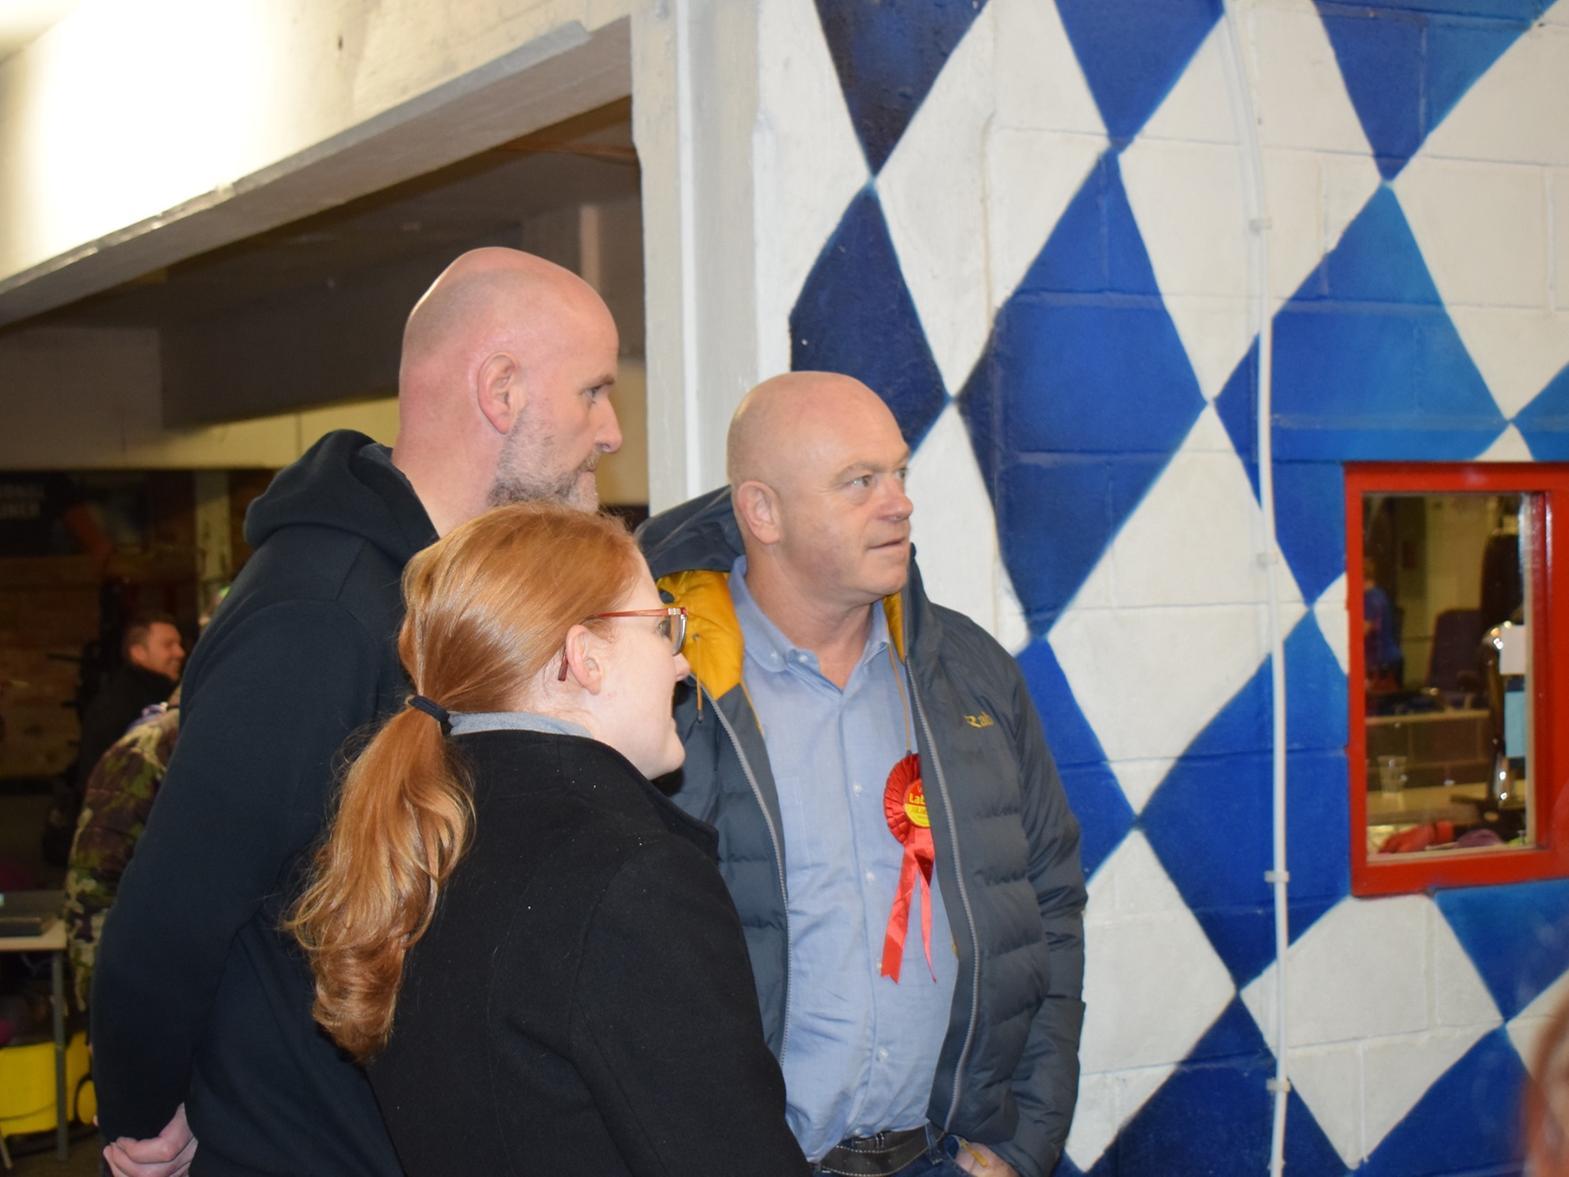 Ross Kemp arrived at 12pm with Labour candidate for Halifax Holly Lynch